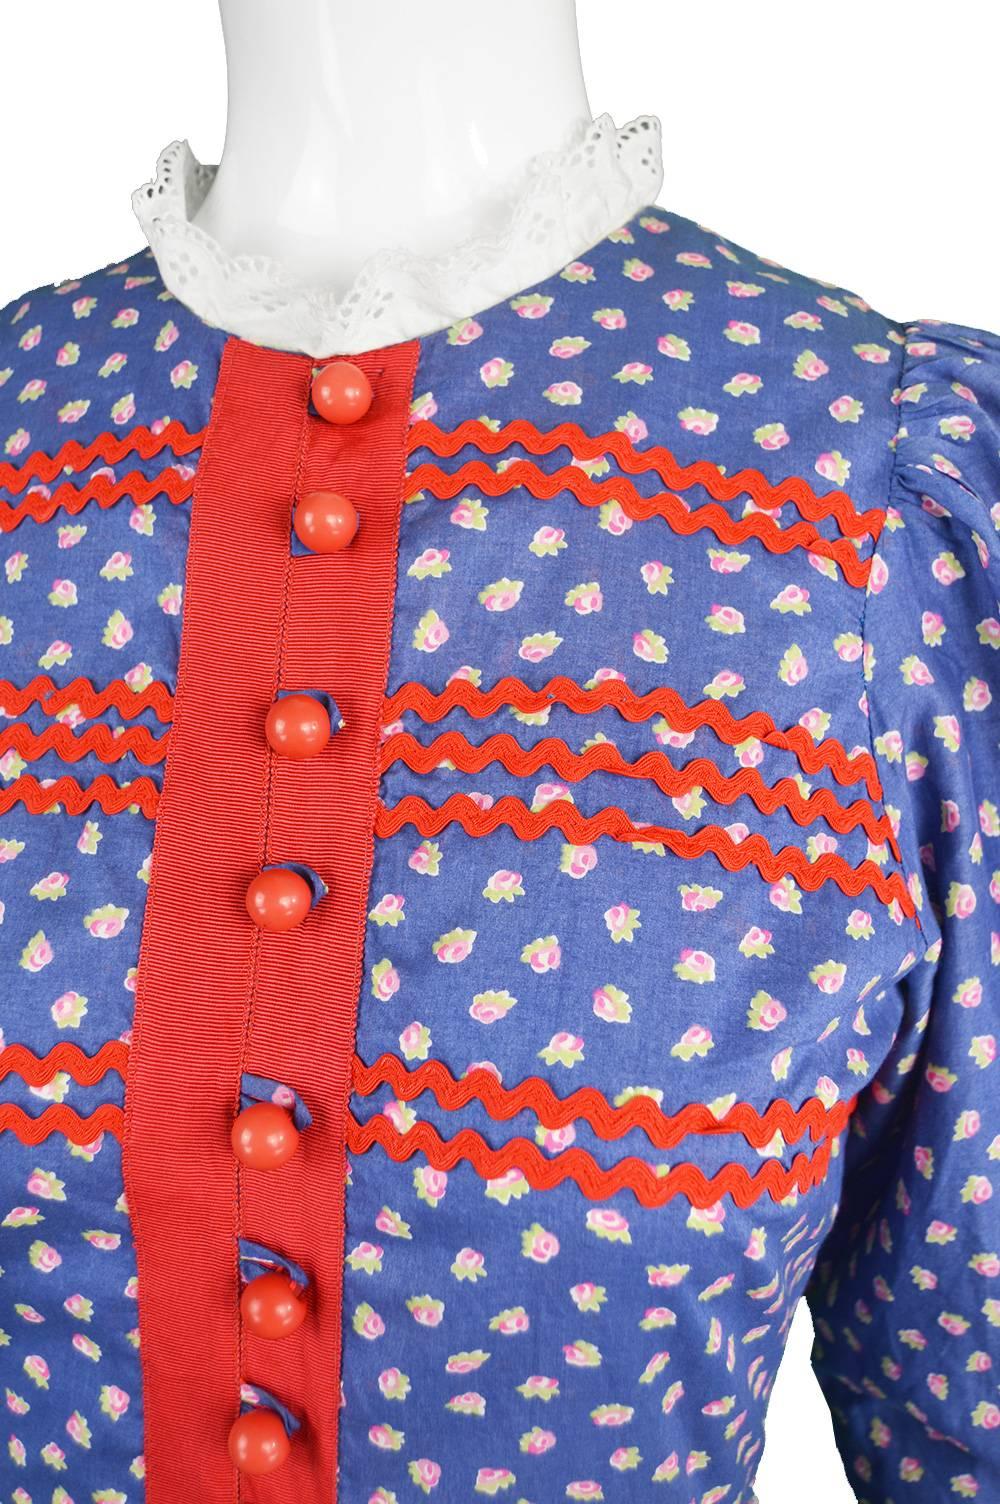 Mary Quant Blue and Red Peasant Dress with Ditsy Floral Print, 1970s at ...